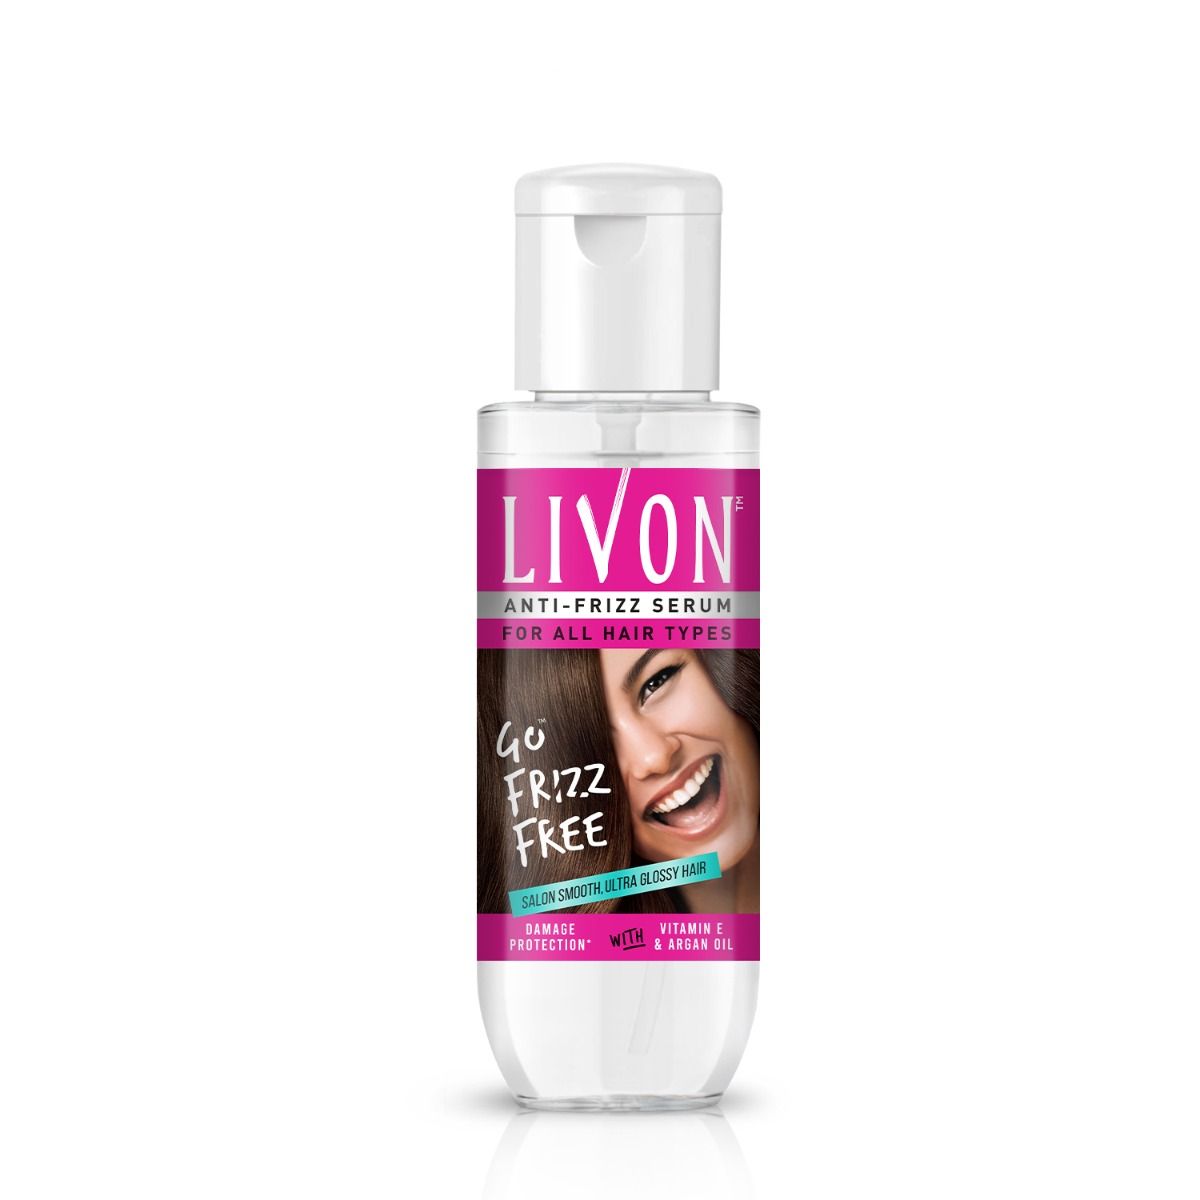 Livon Anti-Frizz Serum For All Hair Types, 20ml, Pack of 1 